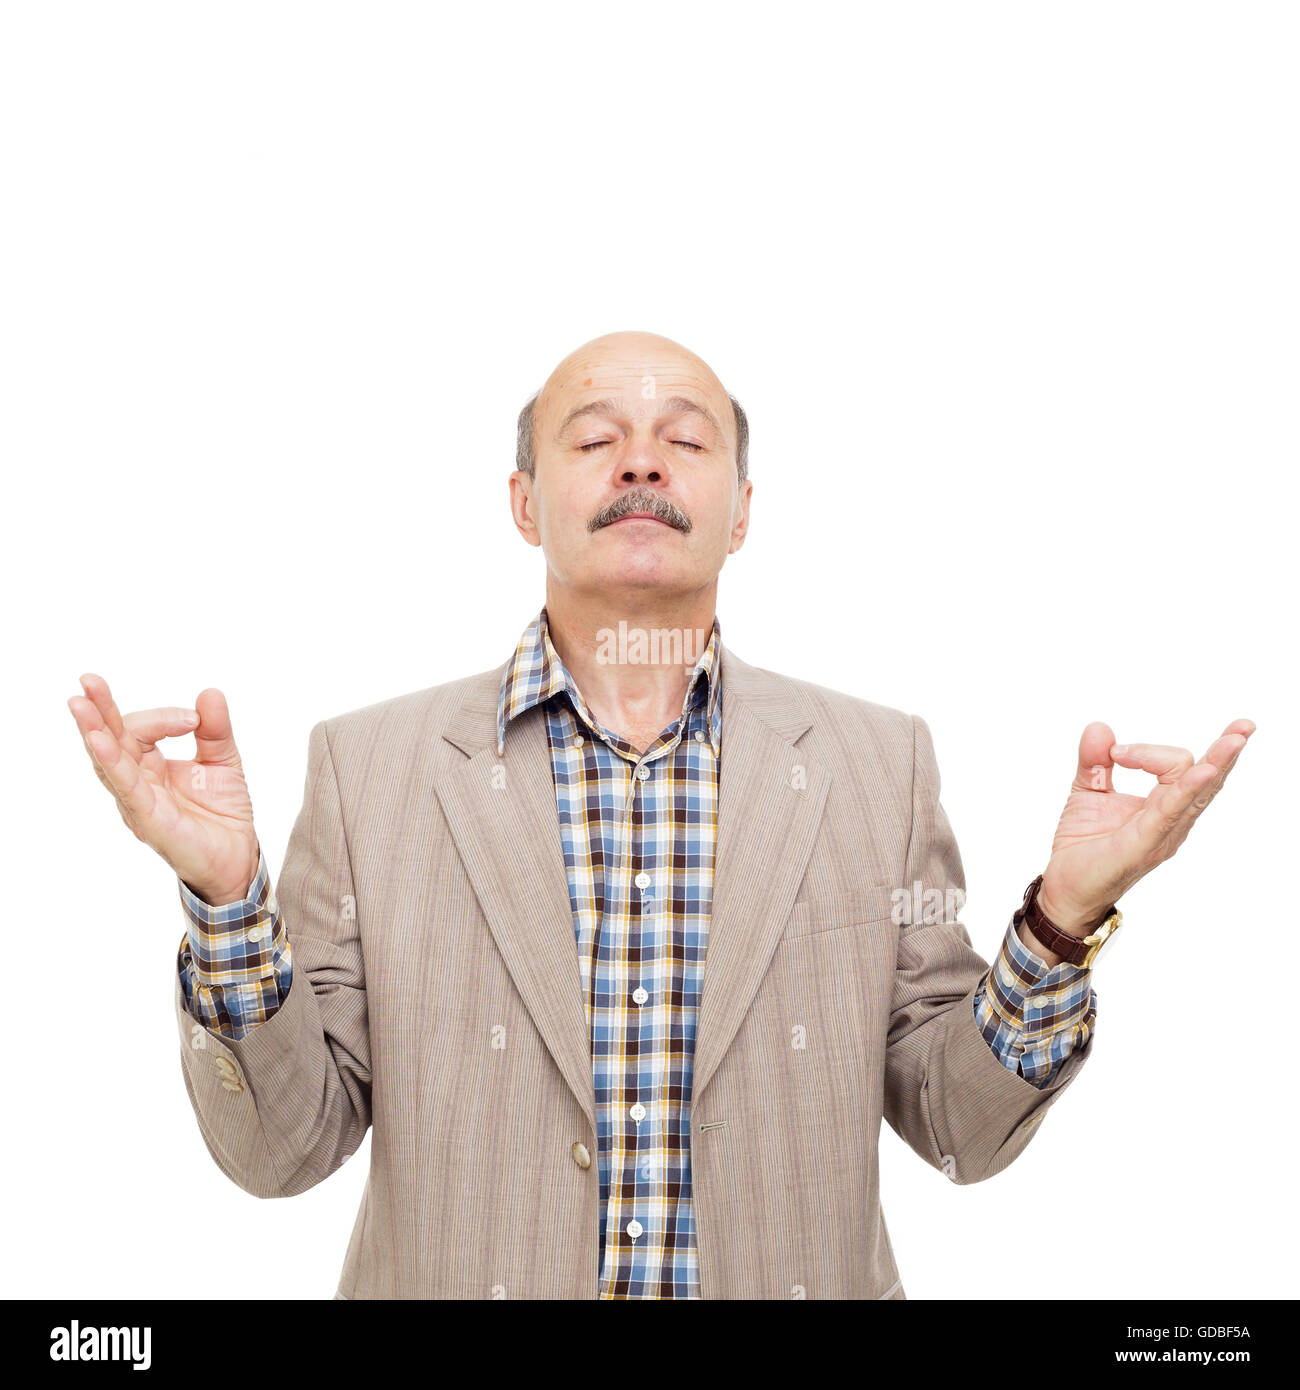 Elderly manager in a business suit meditating. Fingers in form of yoga hand position Stock Photo